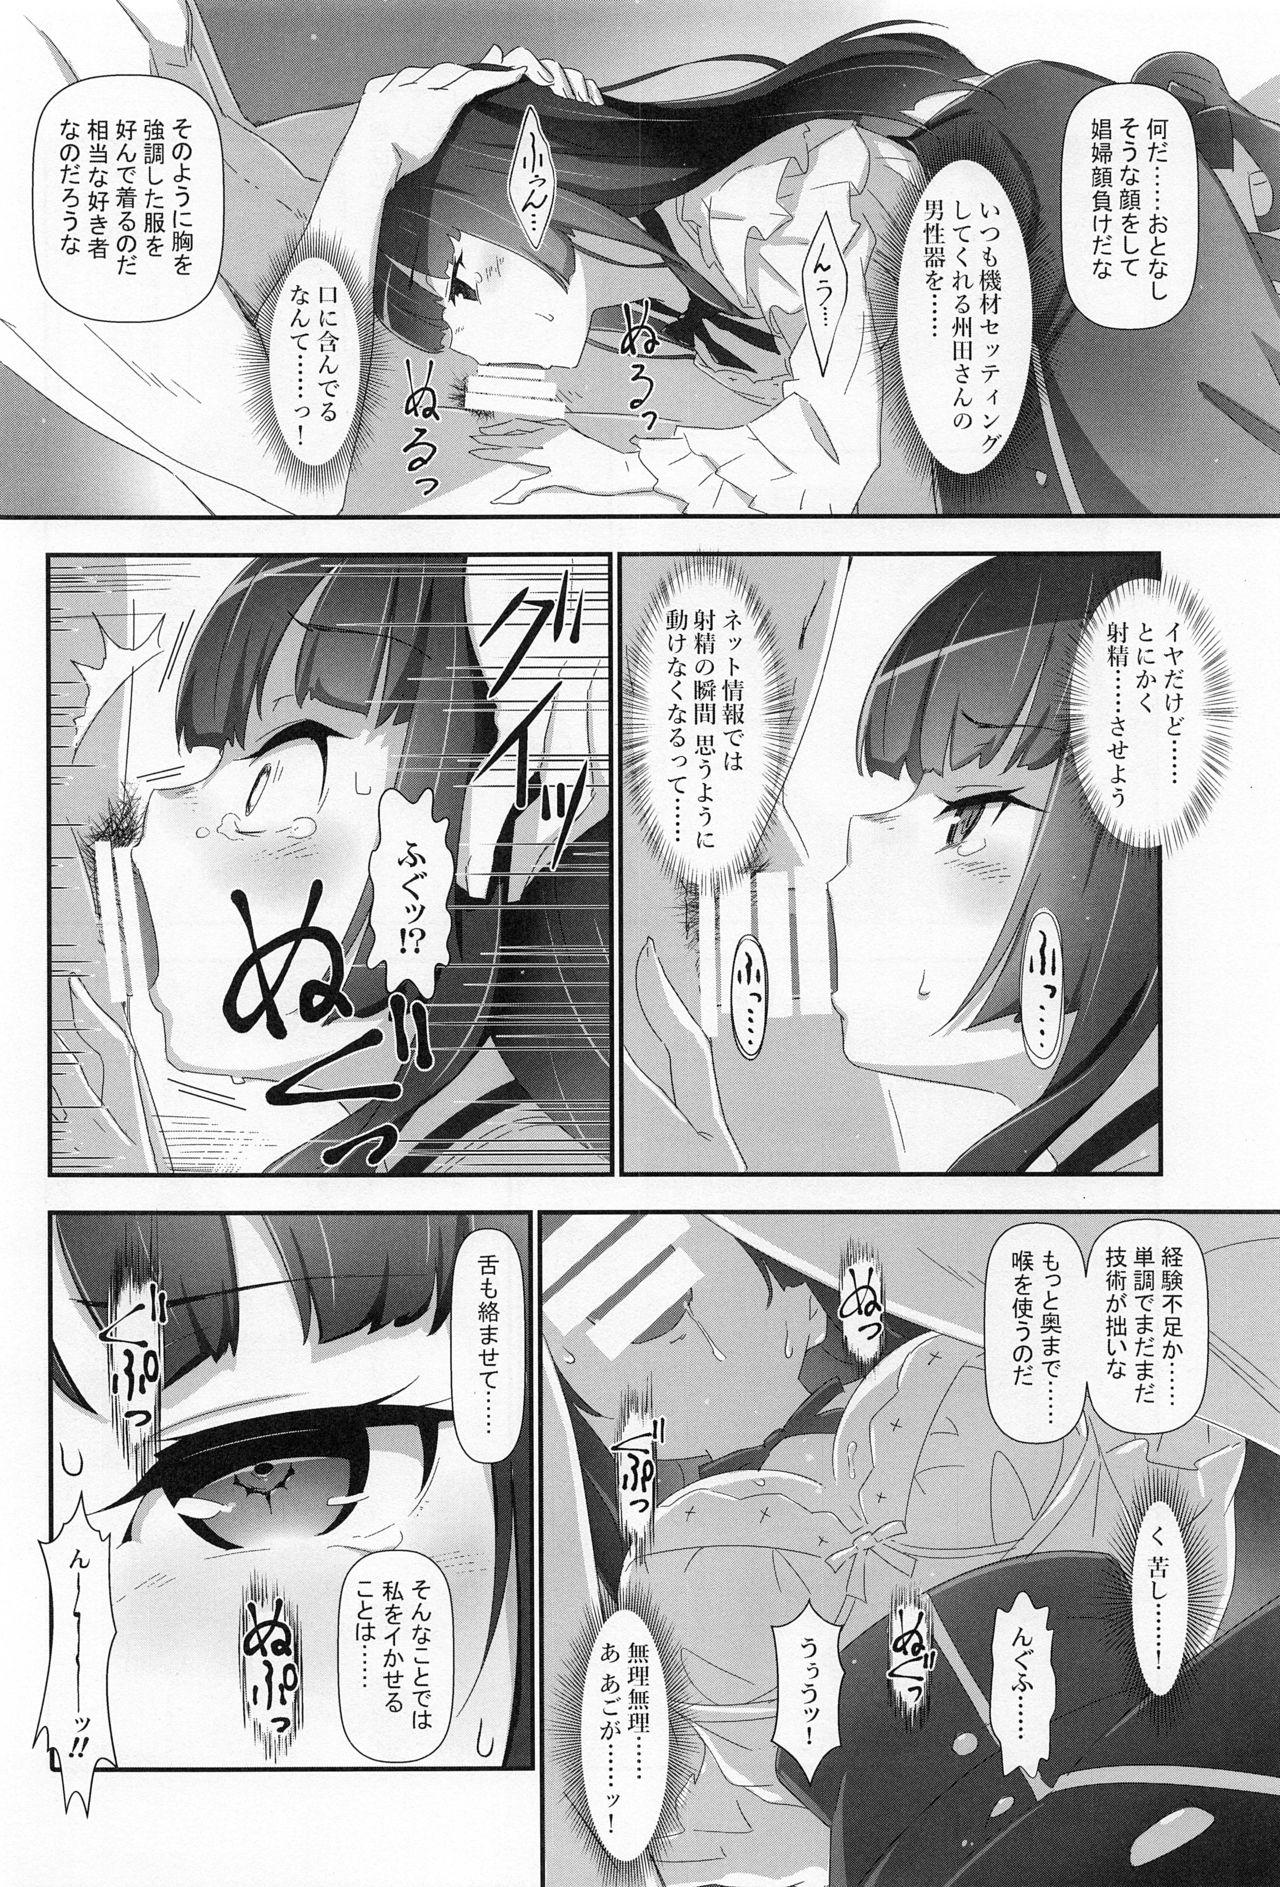 Funny EroYoro? 9 - Bang dream Old - Page 11